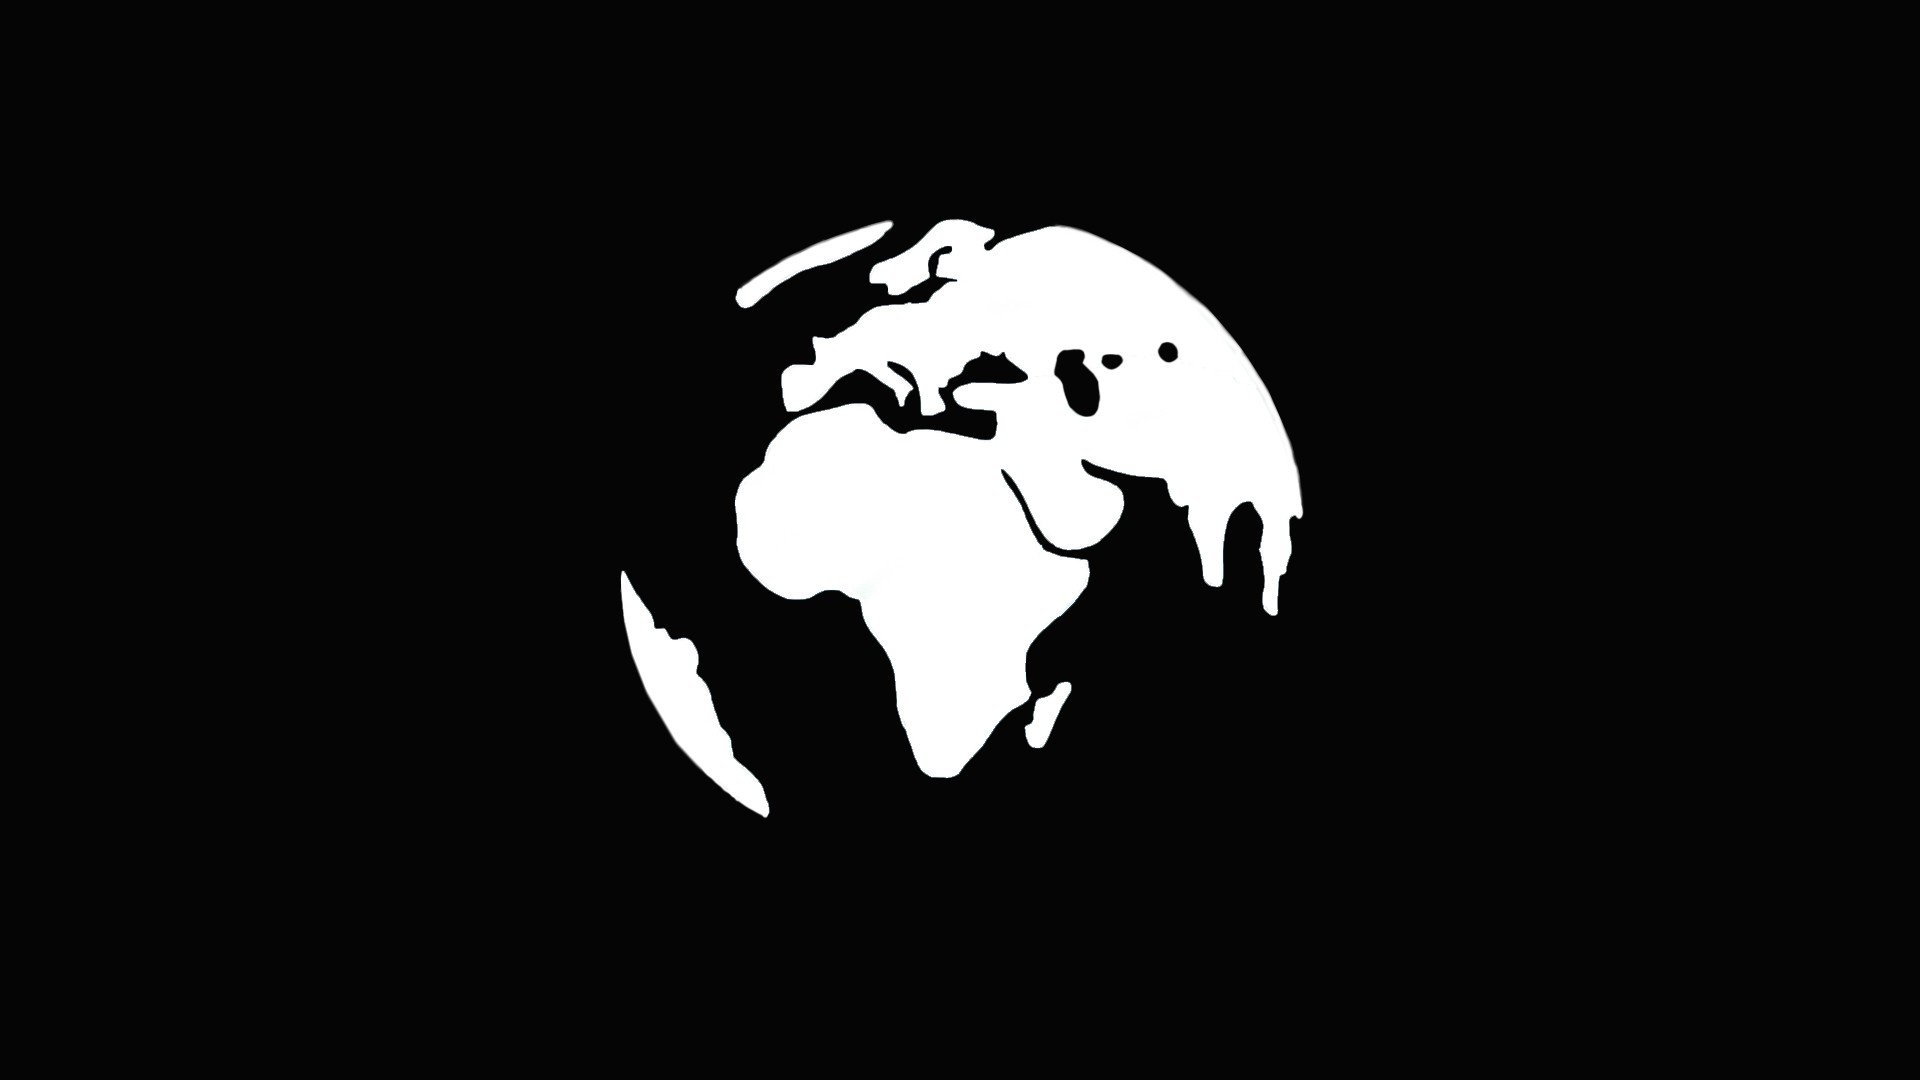 World Minimalism Simple Black White Continents Africa